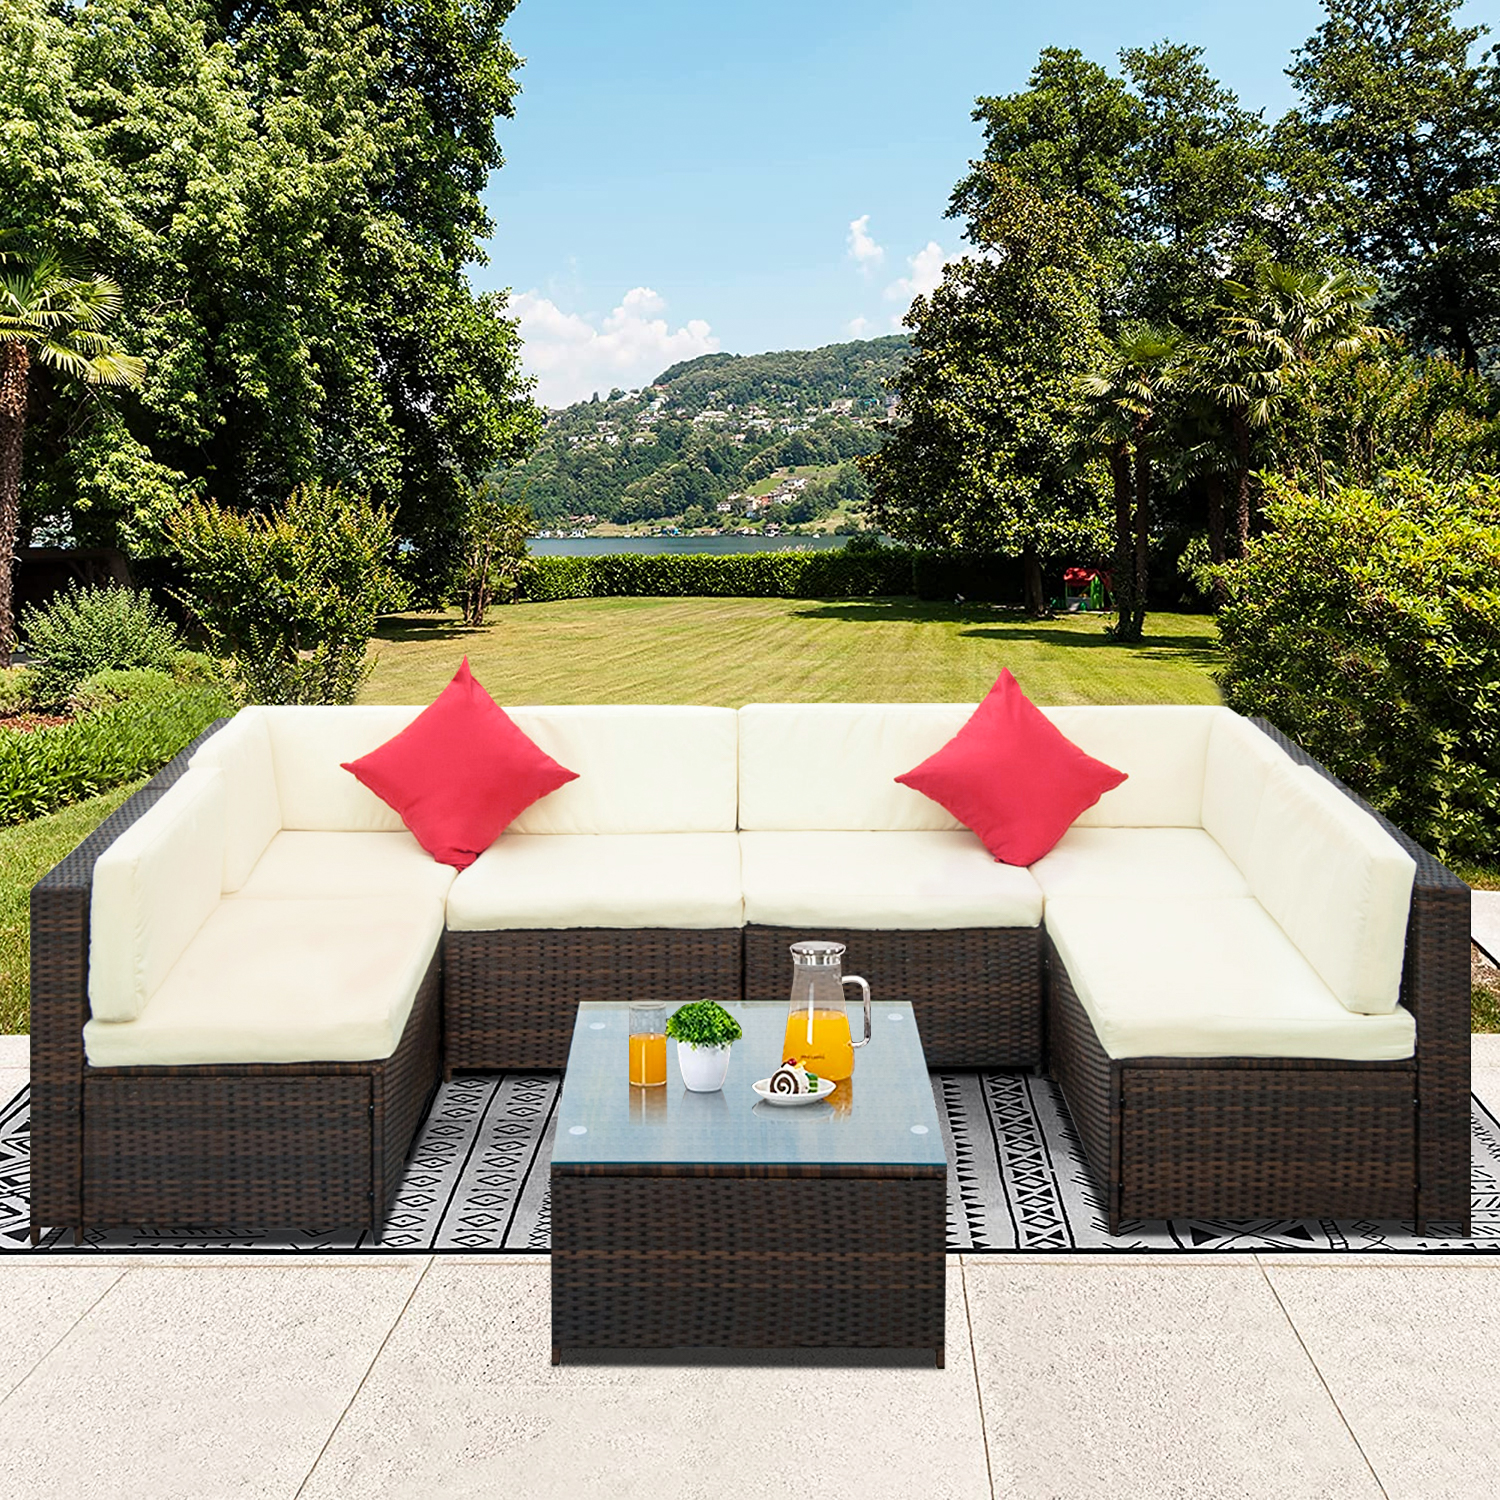 Wicker Patio Furniture Sets for Outdoor Furniture, 2021 Upgrade 7-Piece Conversation Furniture Set w/Corner Sofa, 2 Pillows, Glass Table, 2 Middle Sofa, Single Sofa, Padded Cushions Garden, S13084 - image 1 of 9